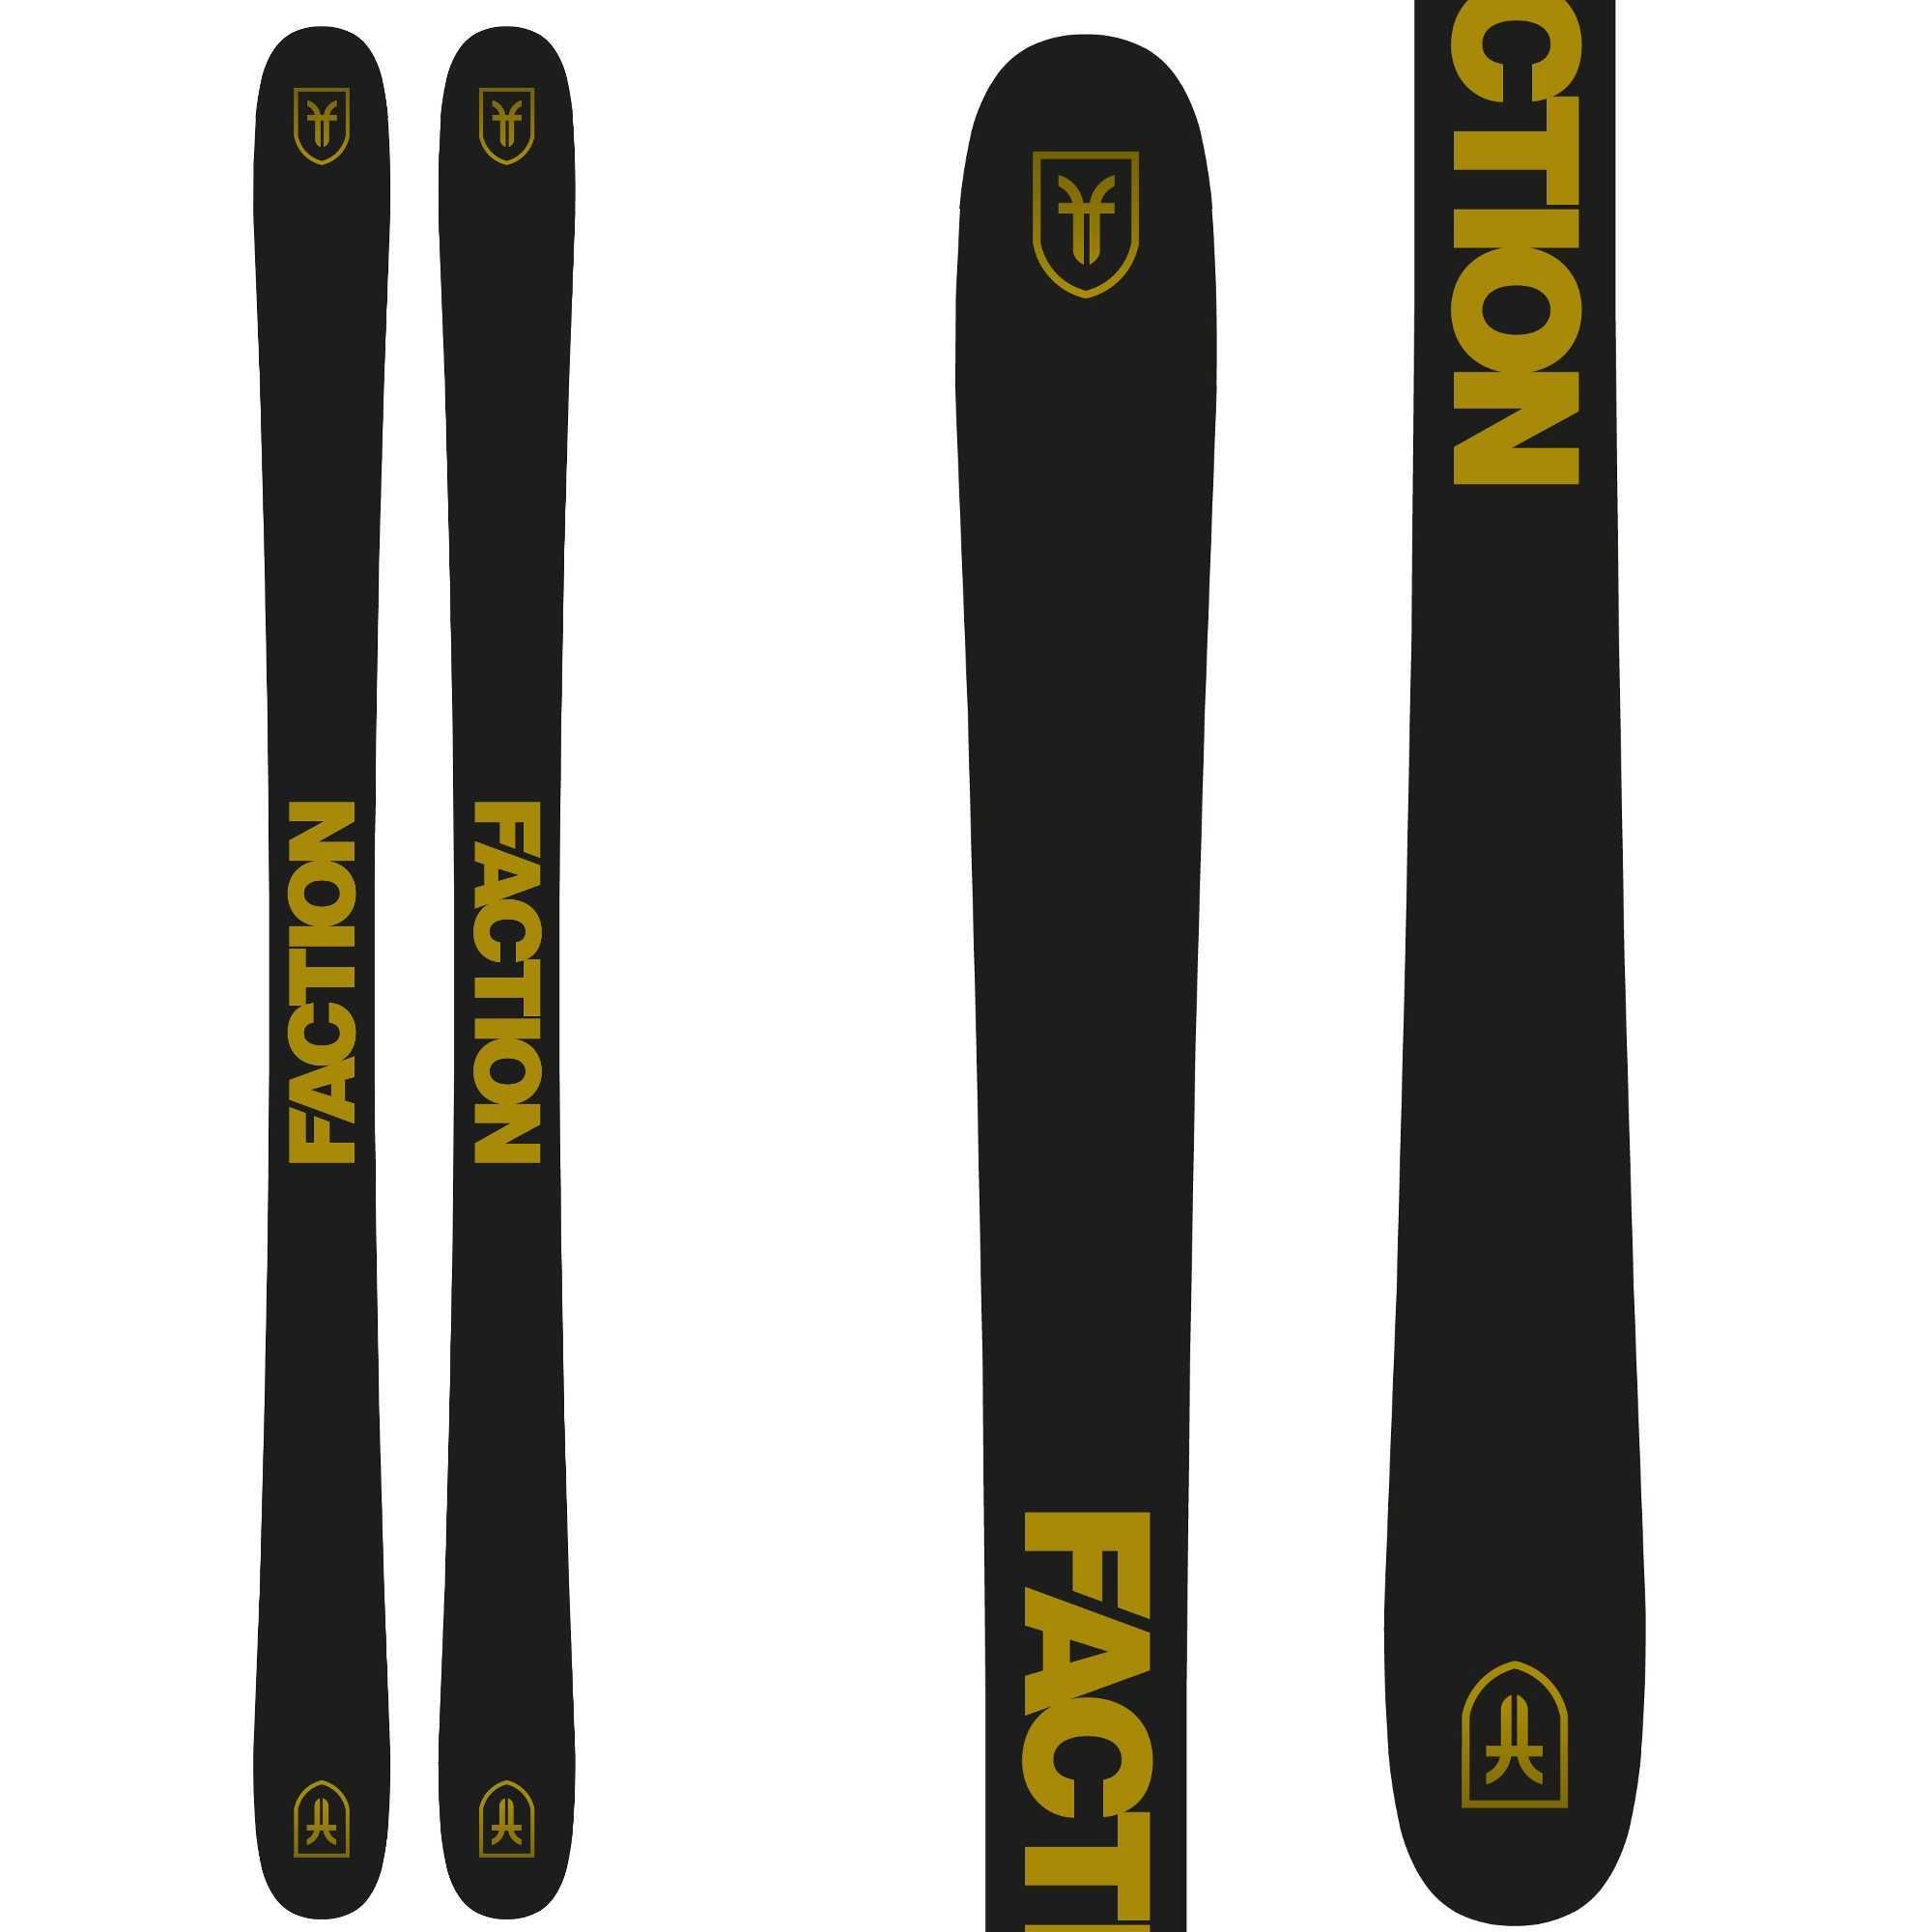 Achat pack ski homme Faction Candide 2.0 2018 + fixations 